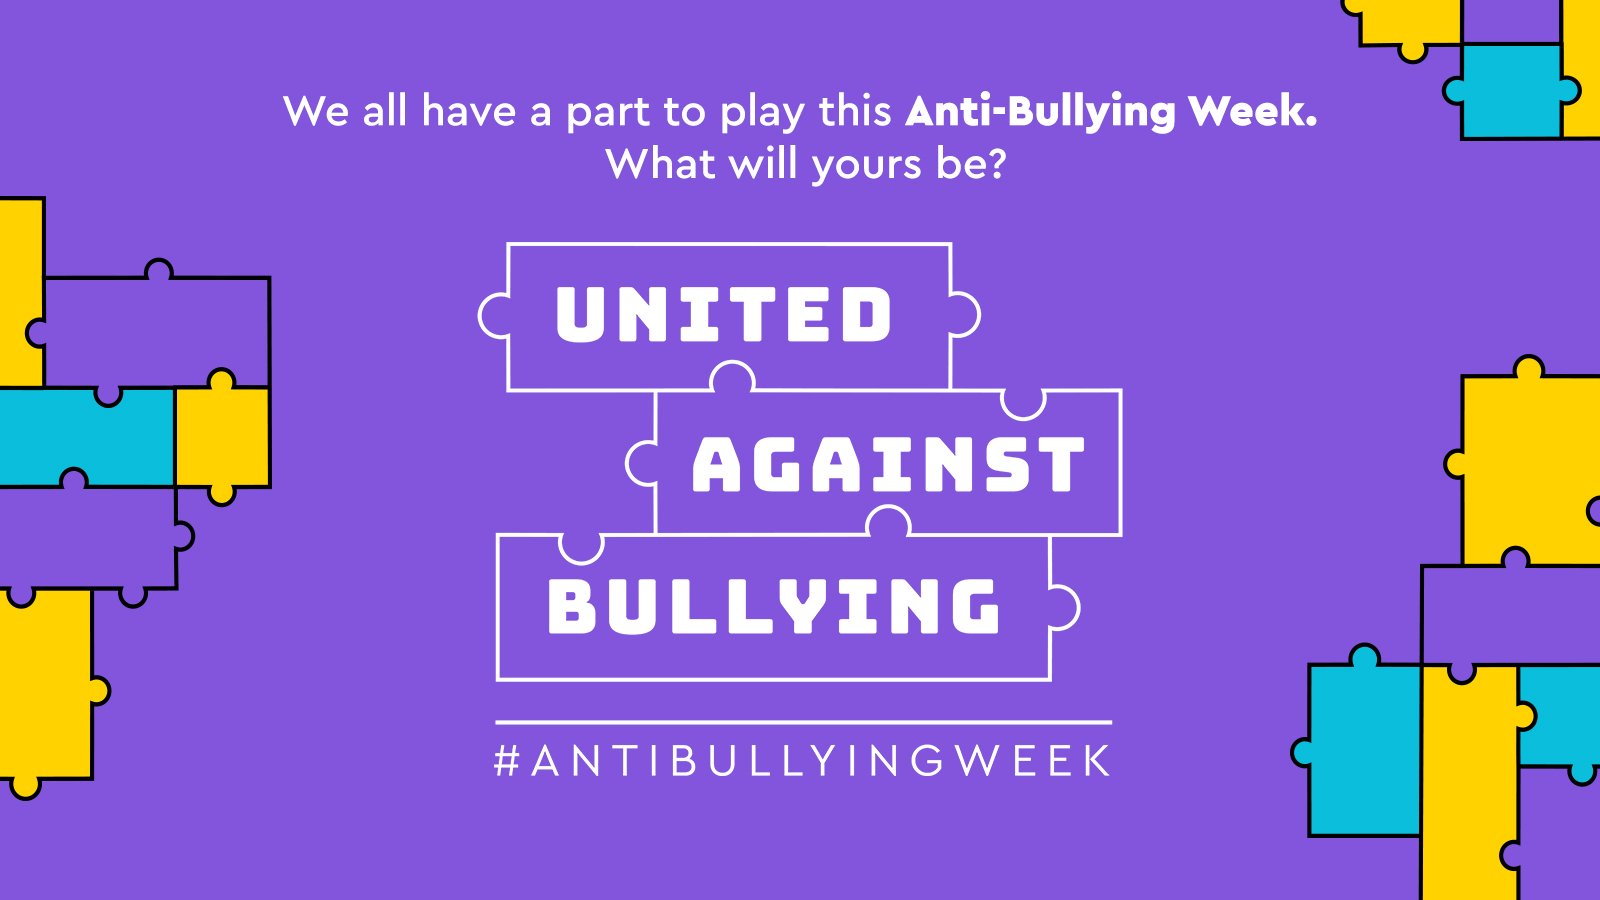 We all have a part to play this Anti-Bullying Week. What will yours be? United Against Bullying #antibullyingweek